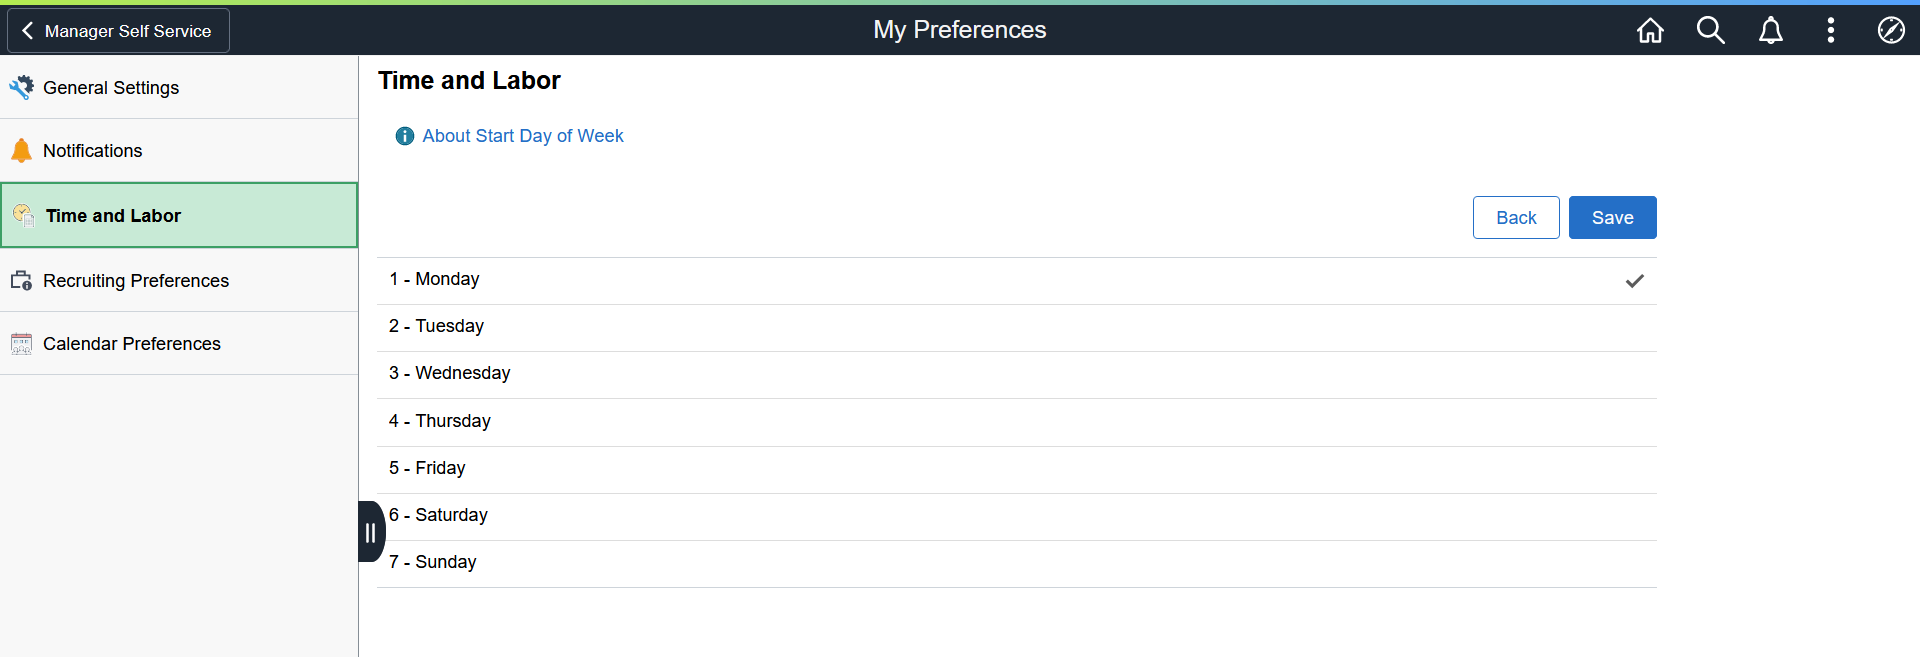 Start Day of Week section of the Time Reporting Preferences page